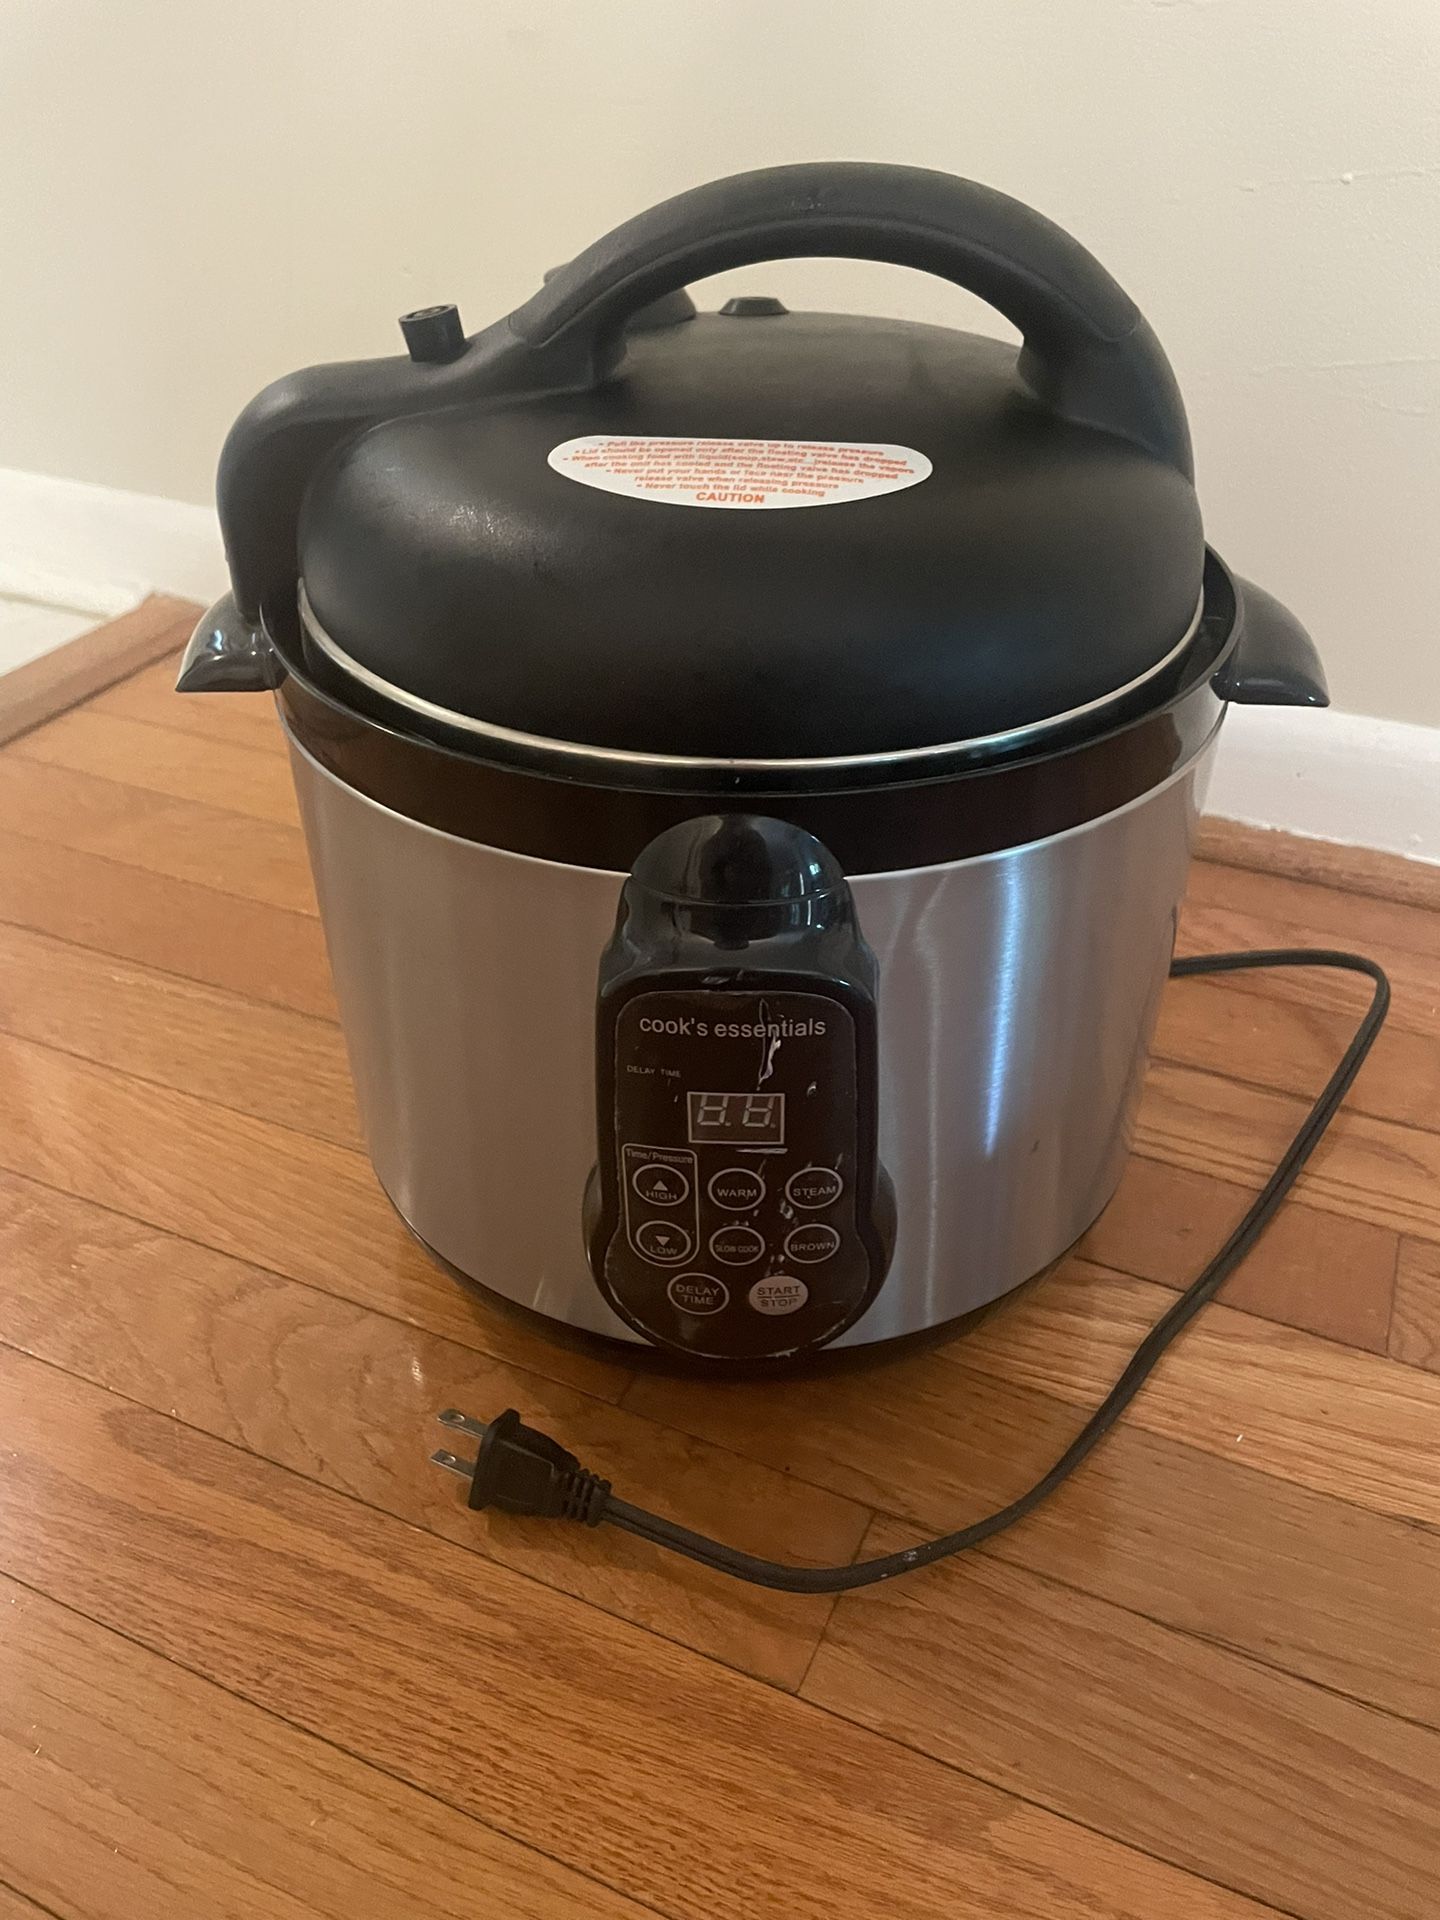 Cook's Essentials 4-Quart Pressure Cooker, Used <5 Times, Used